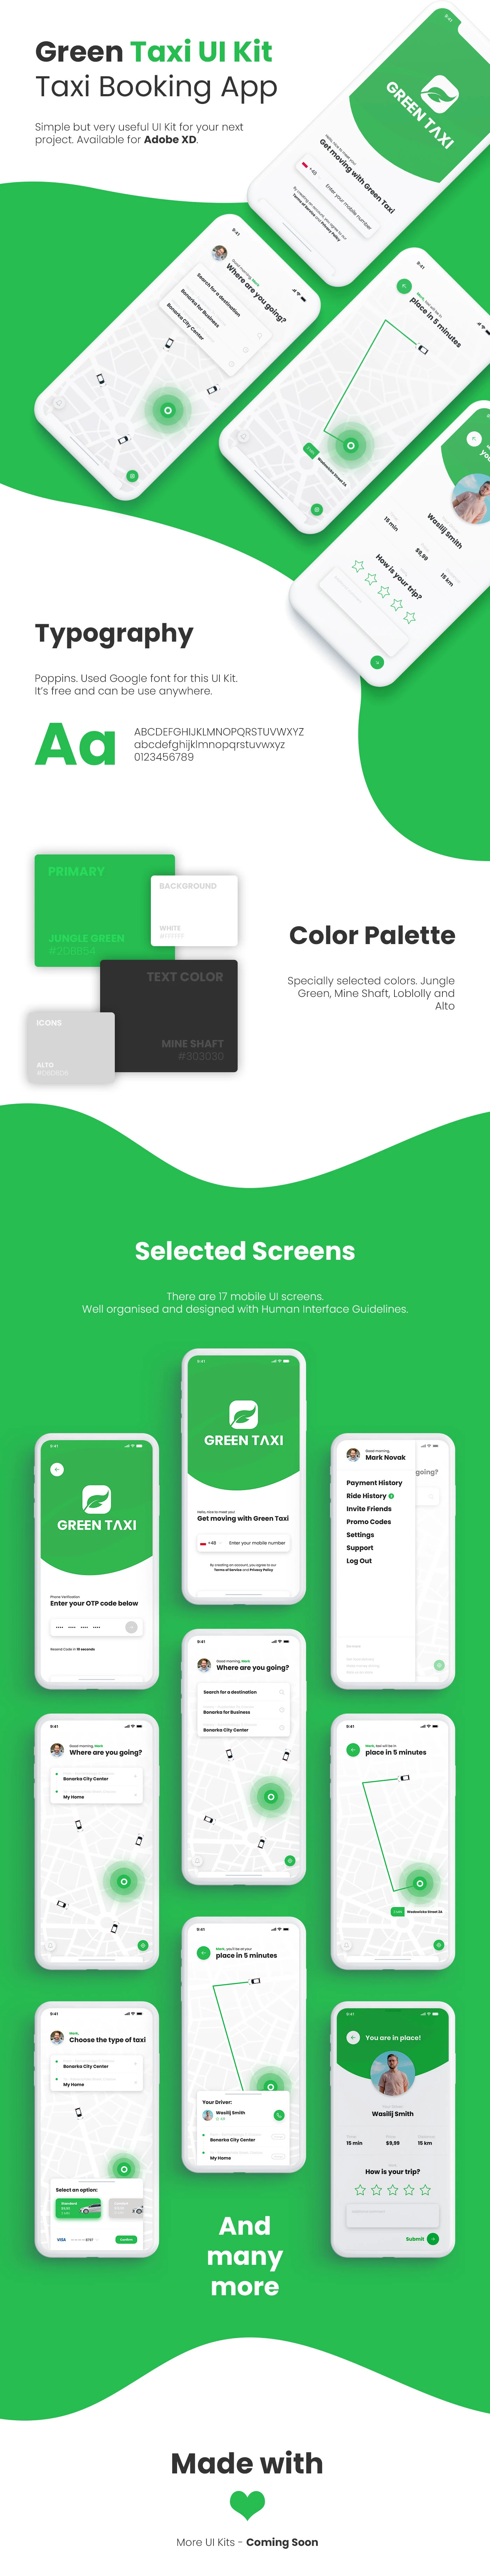 Green Taxi Free App UI Kit - Minimal and clean app design for Adobe XD, 15 screens for you to get started.